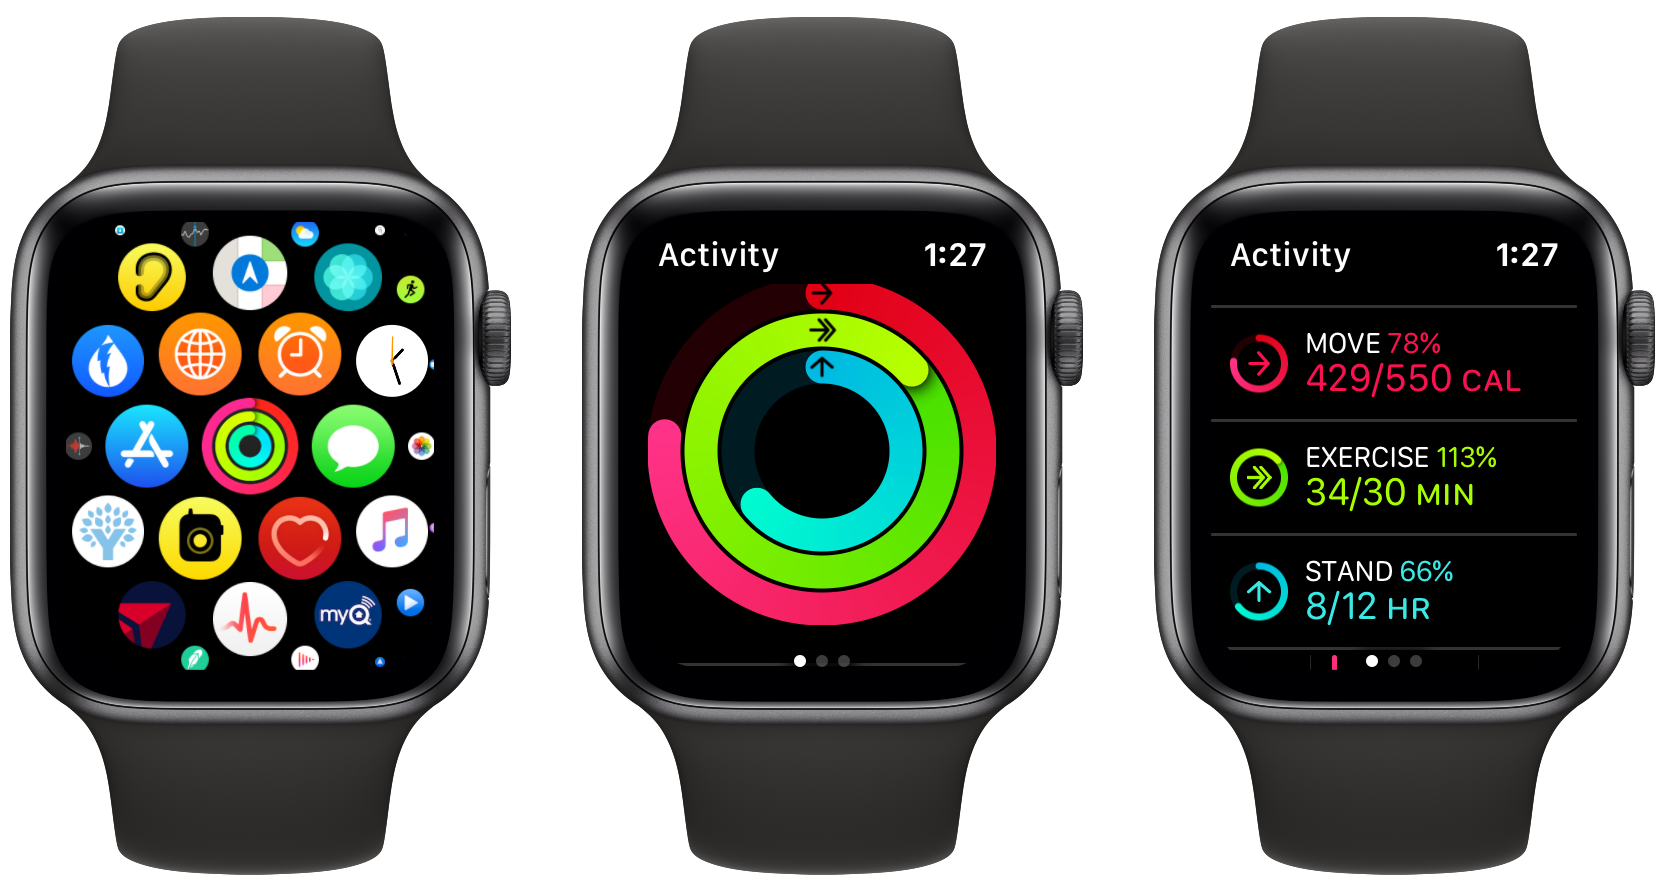 Apple Watch: How to see calories burned â active, passive, and total